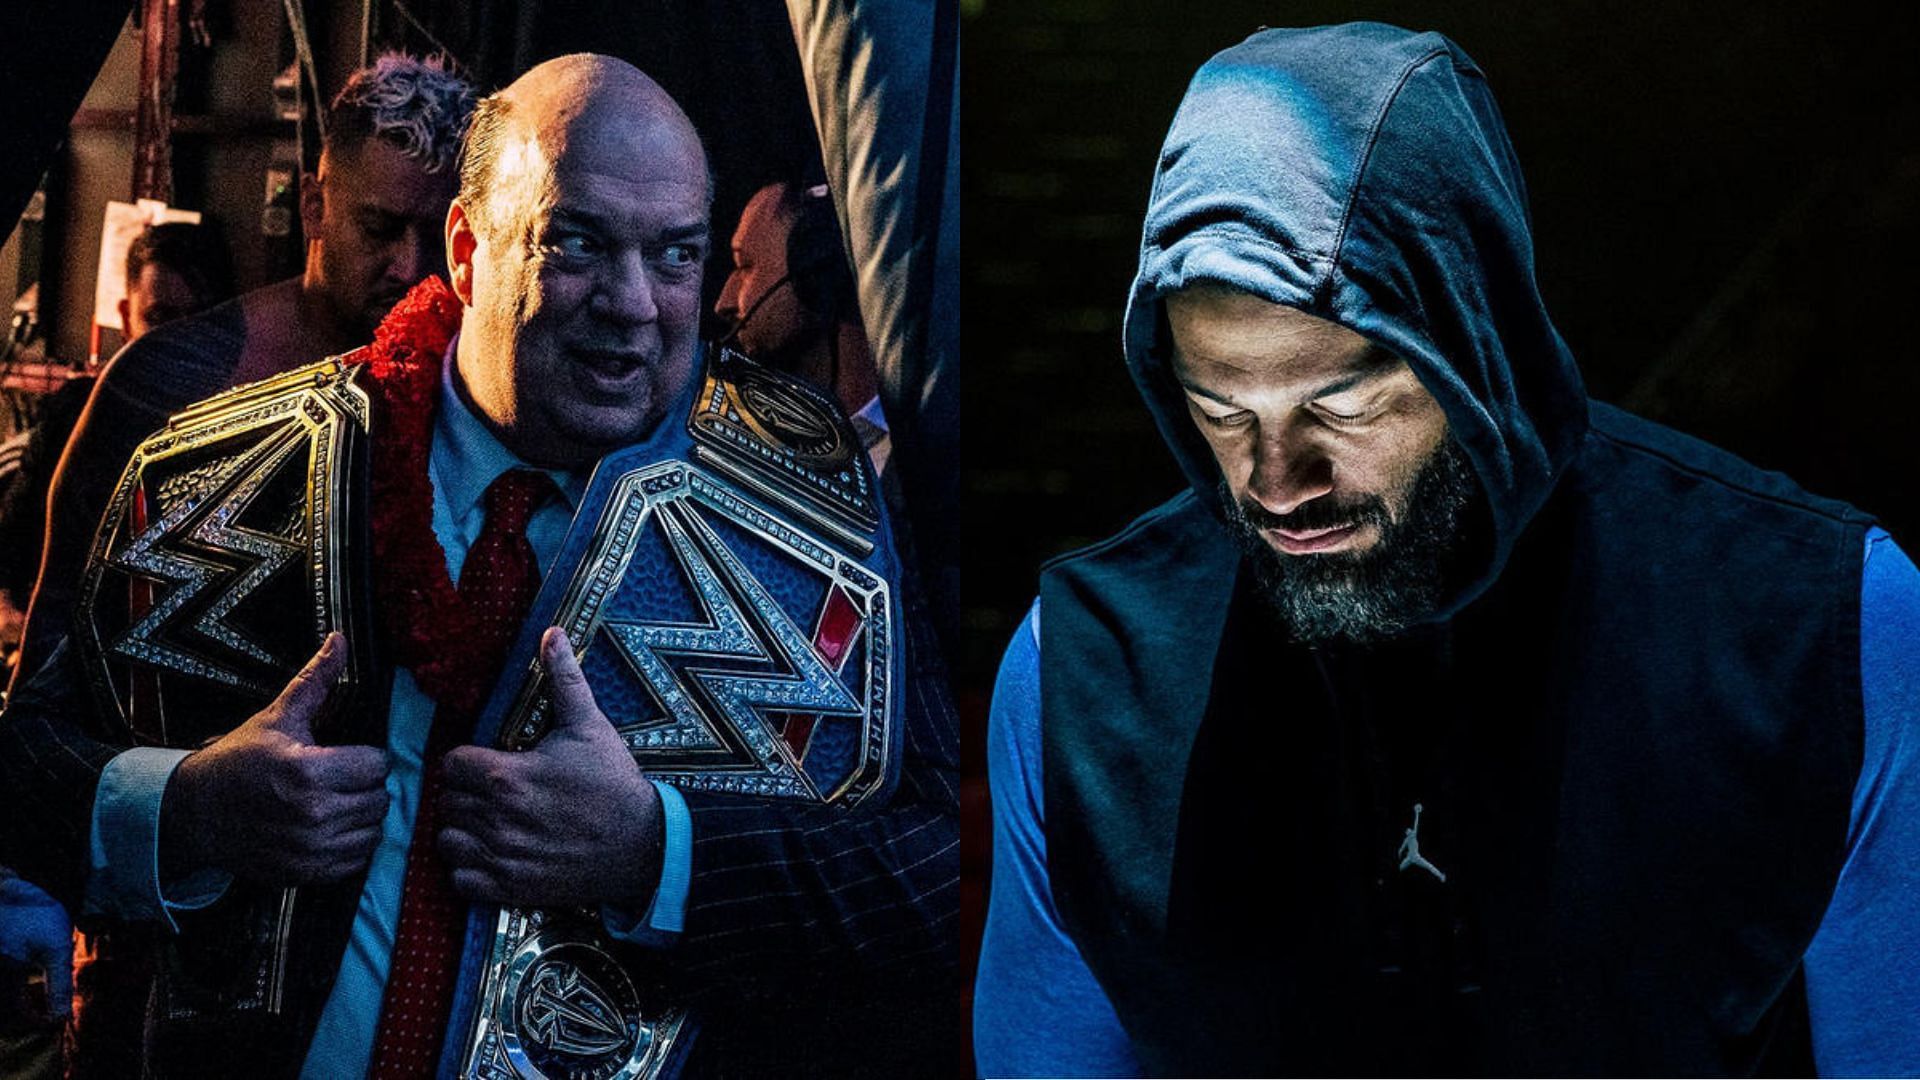 Paul Heyman and Roman Reigns were the foundation of The Bloodline faction